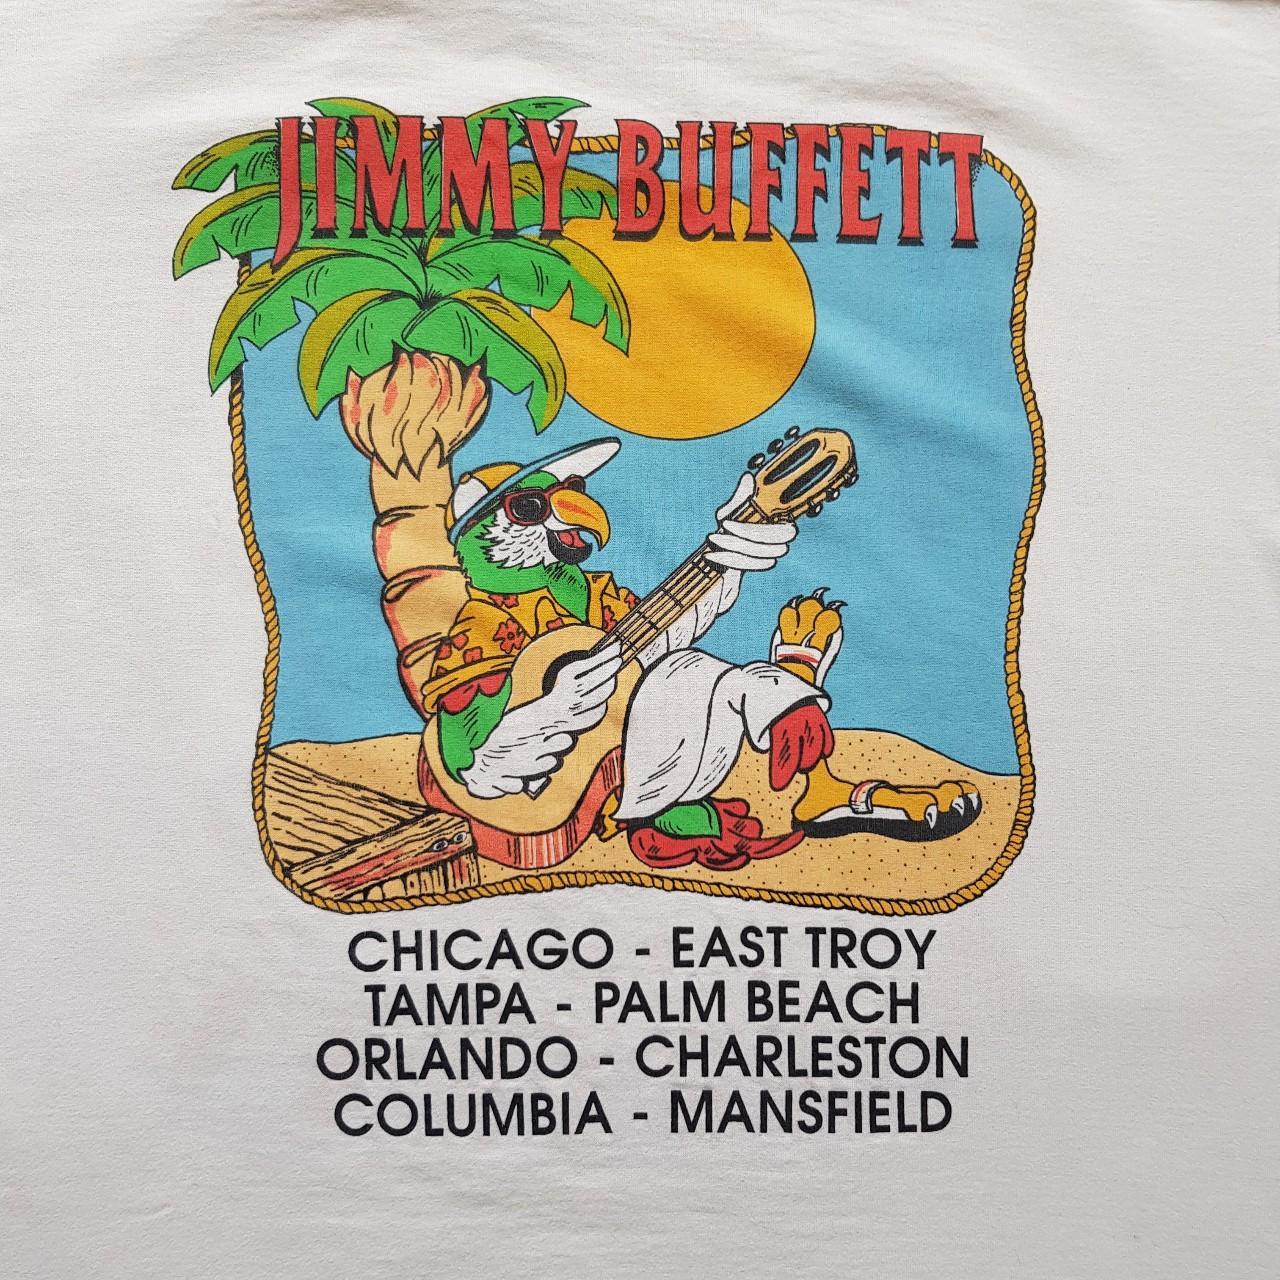 90s fruit of the loom jimmy buffet tour tshirt